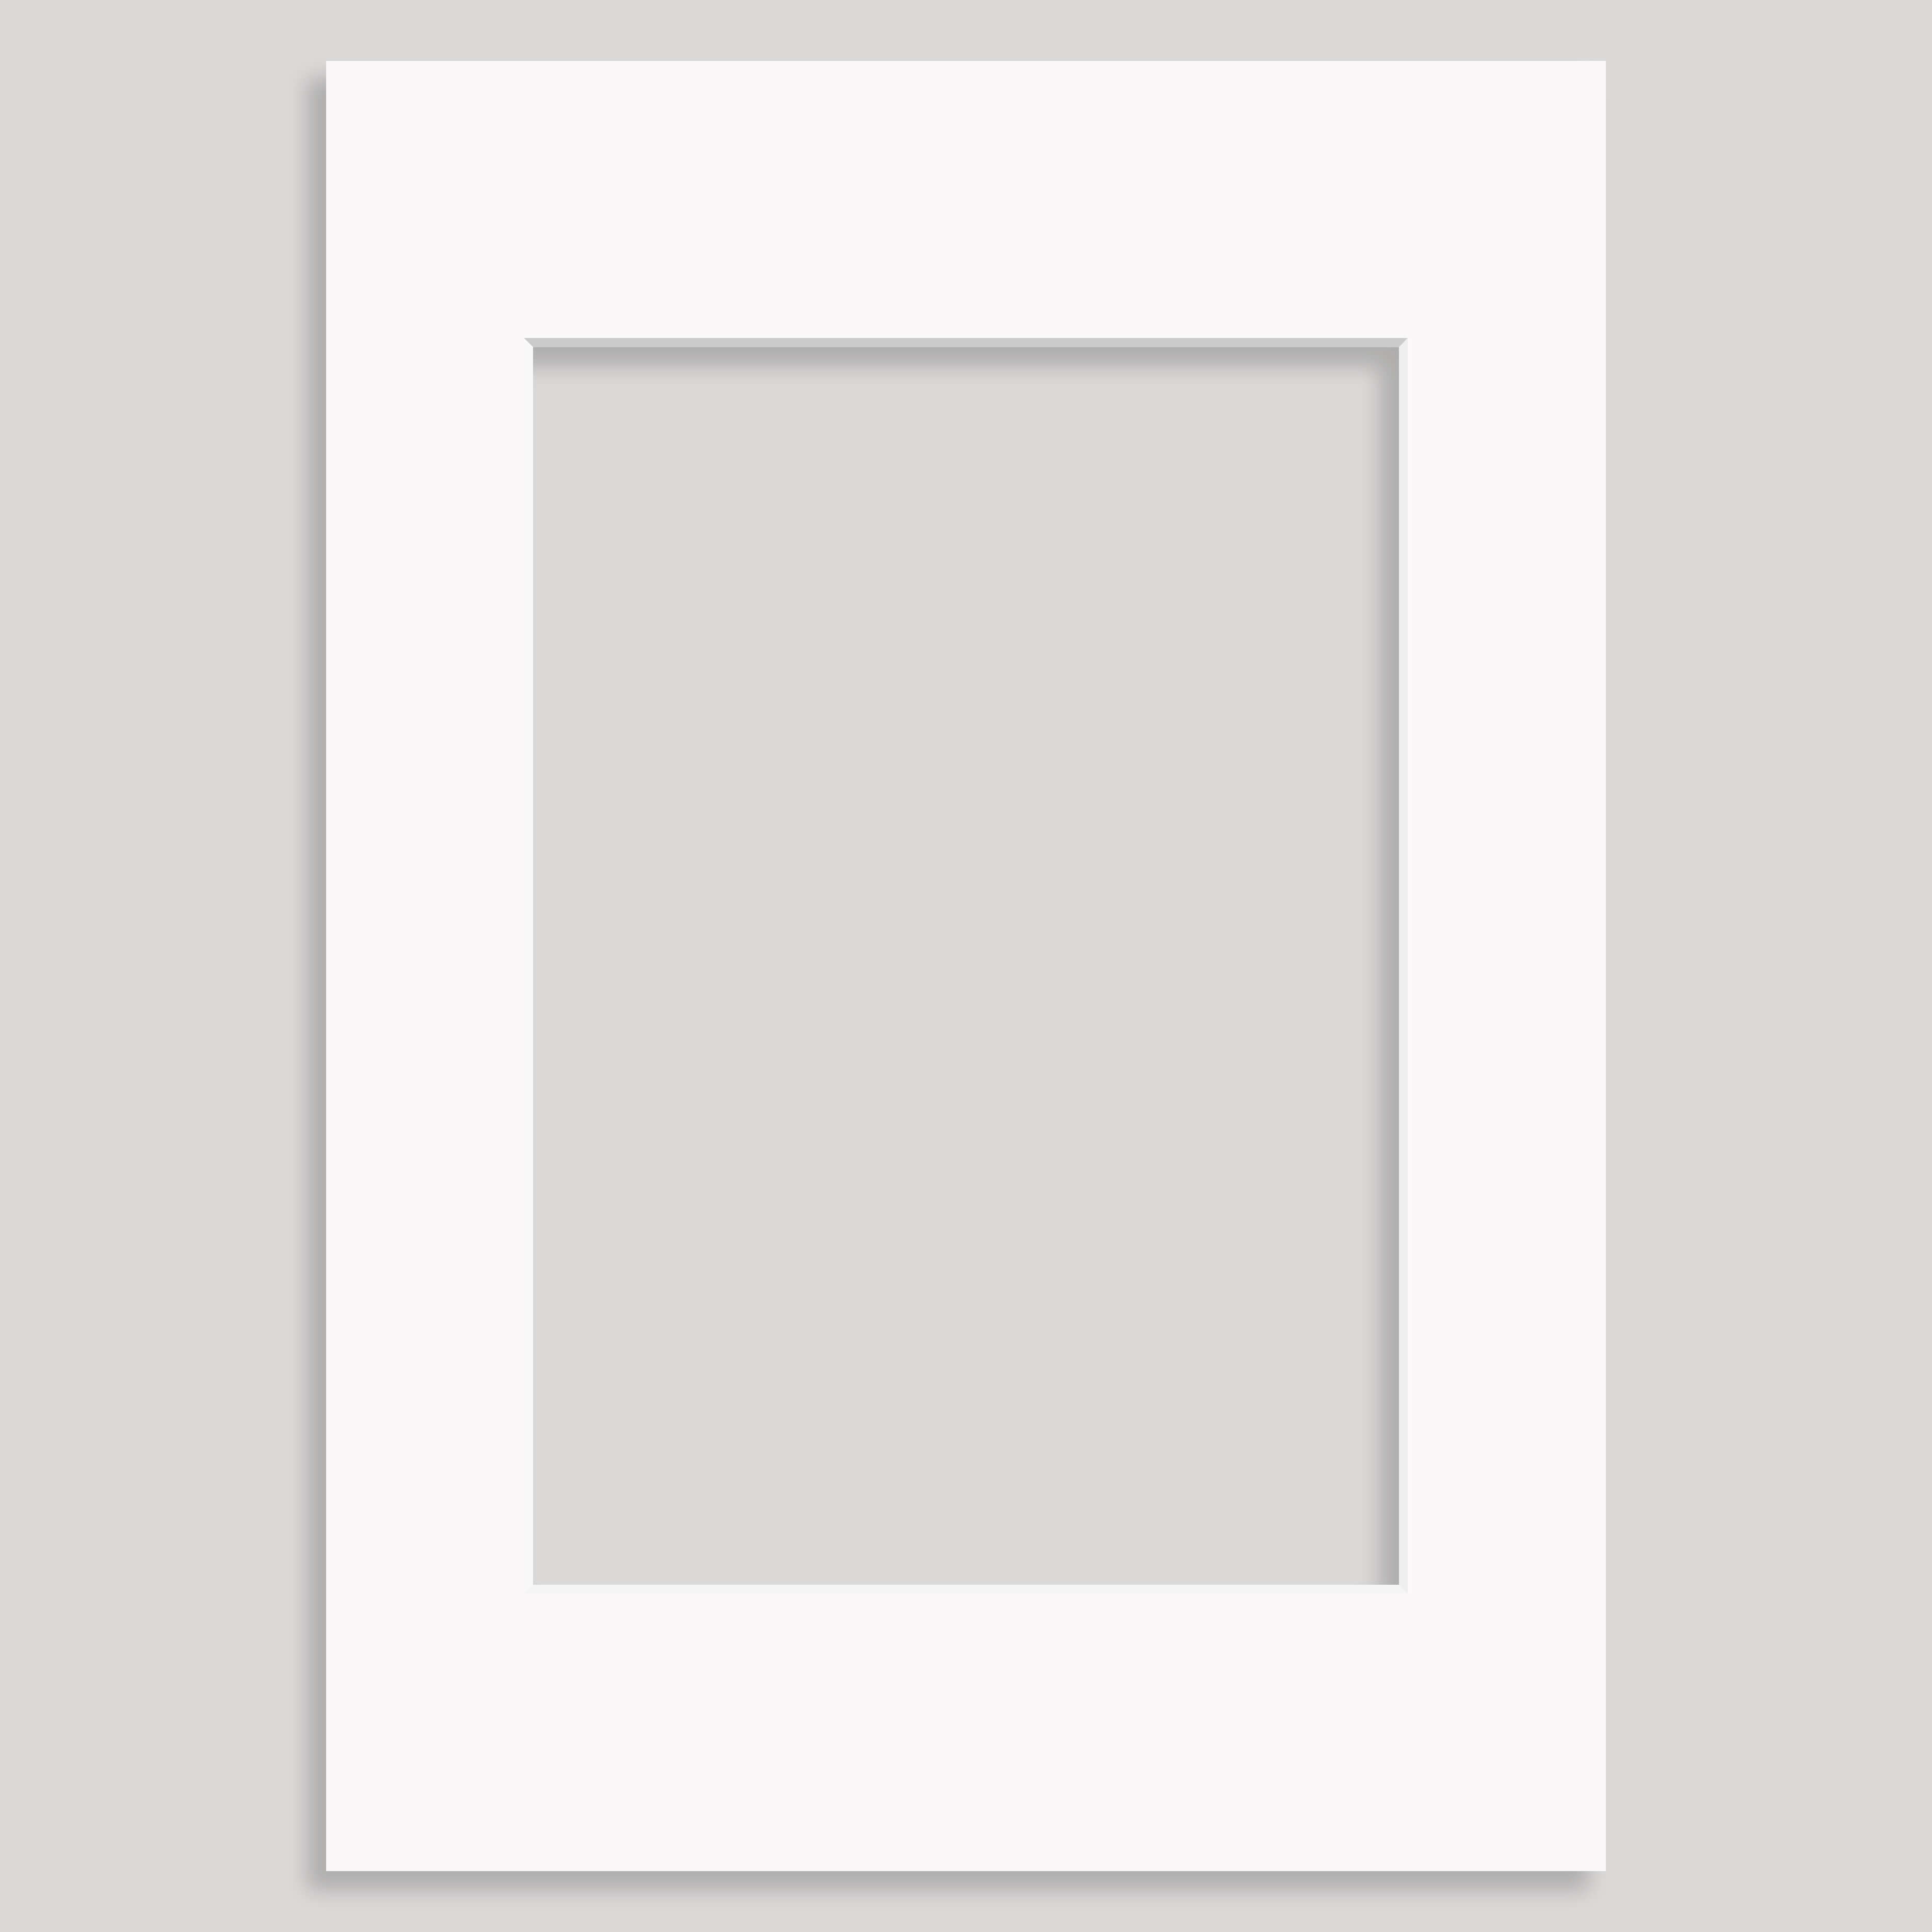 A4 Photo/Picture Mount for an A5 Picture/Photo (individually bagged) – 8698 Glacier White